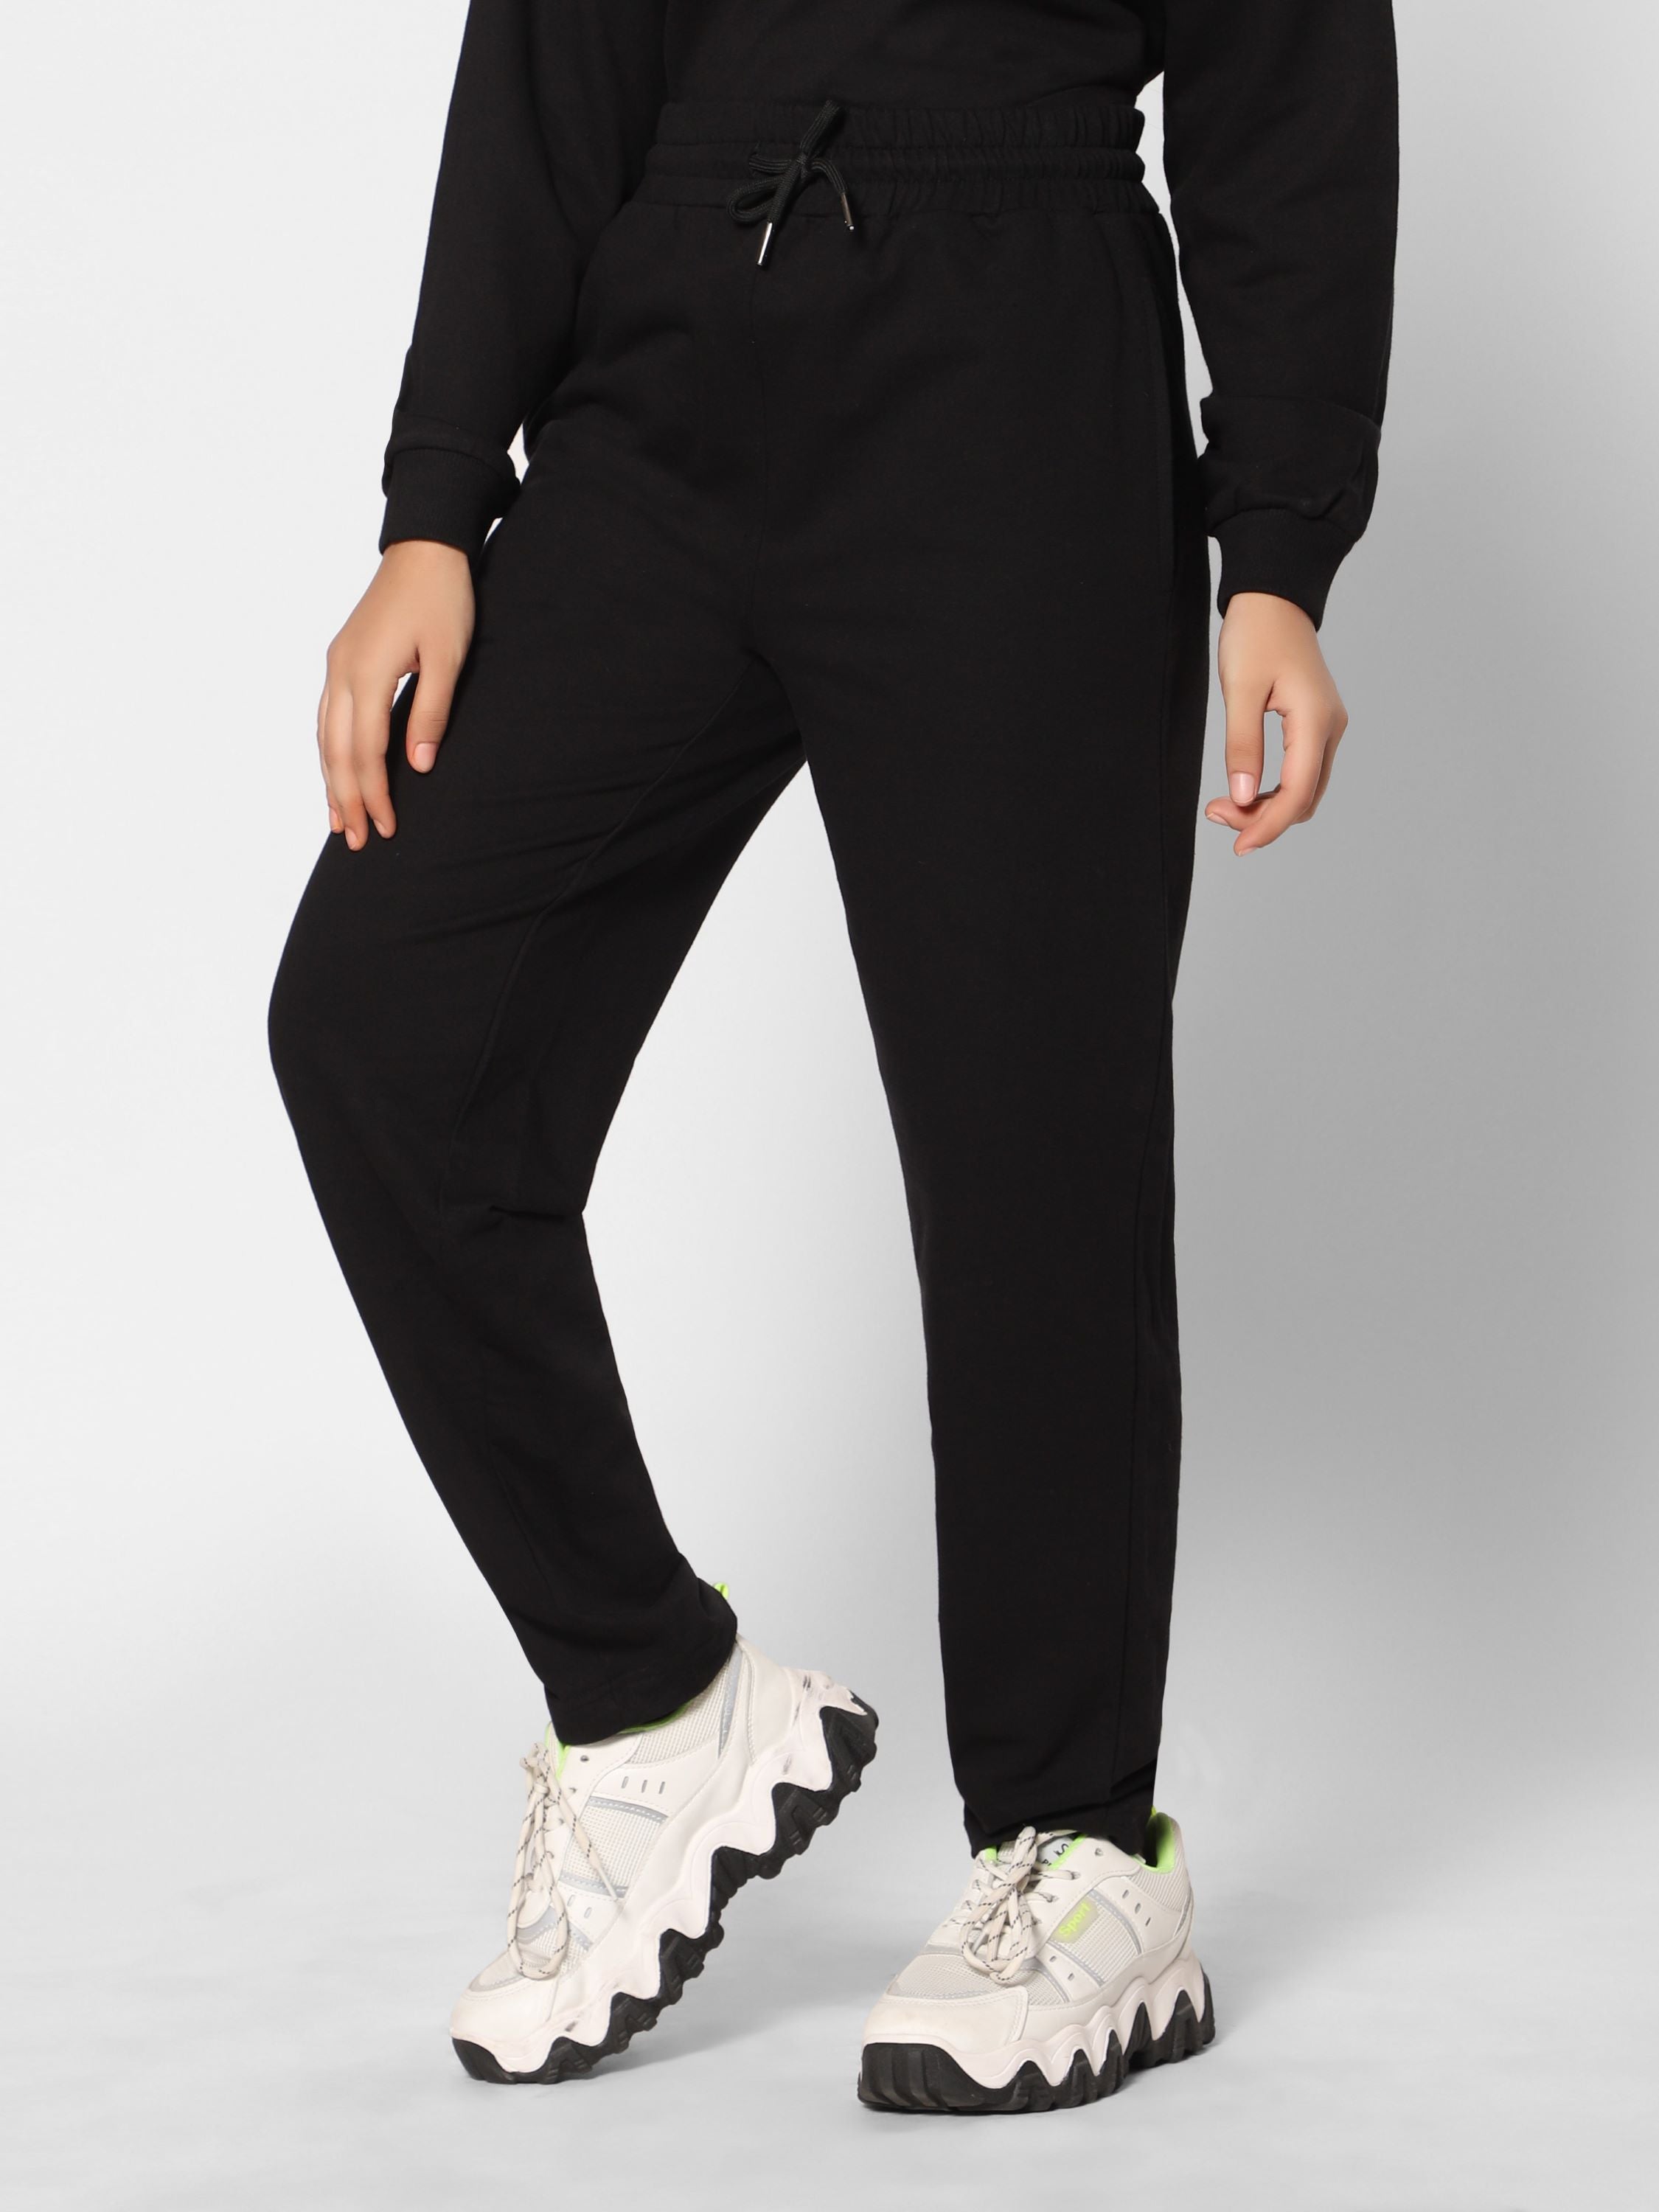 Polyester Loop Knit Pants Women's Track Pant, Model Name/Number: 1202 at Rs  895/piece in Mumbai